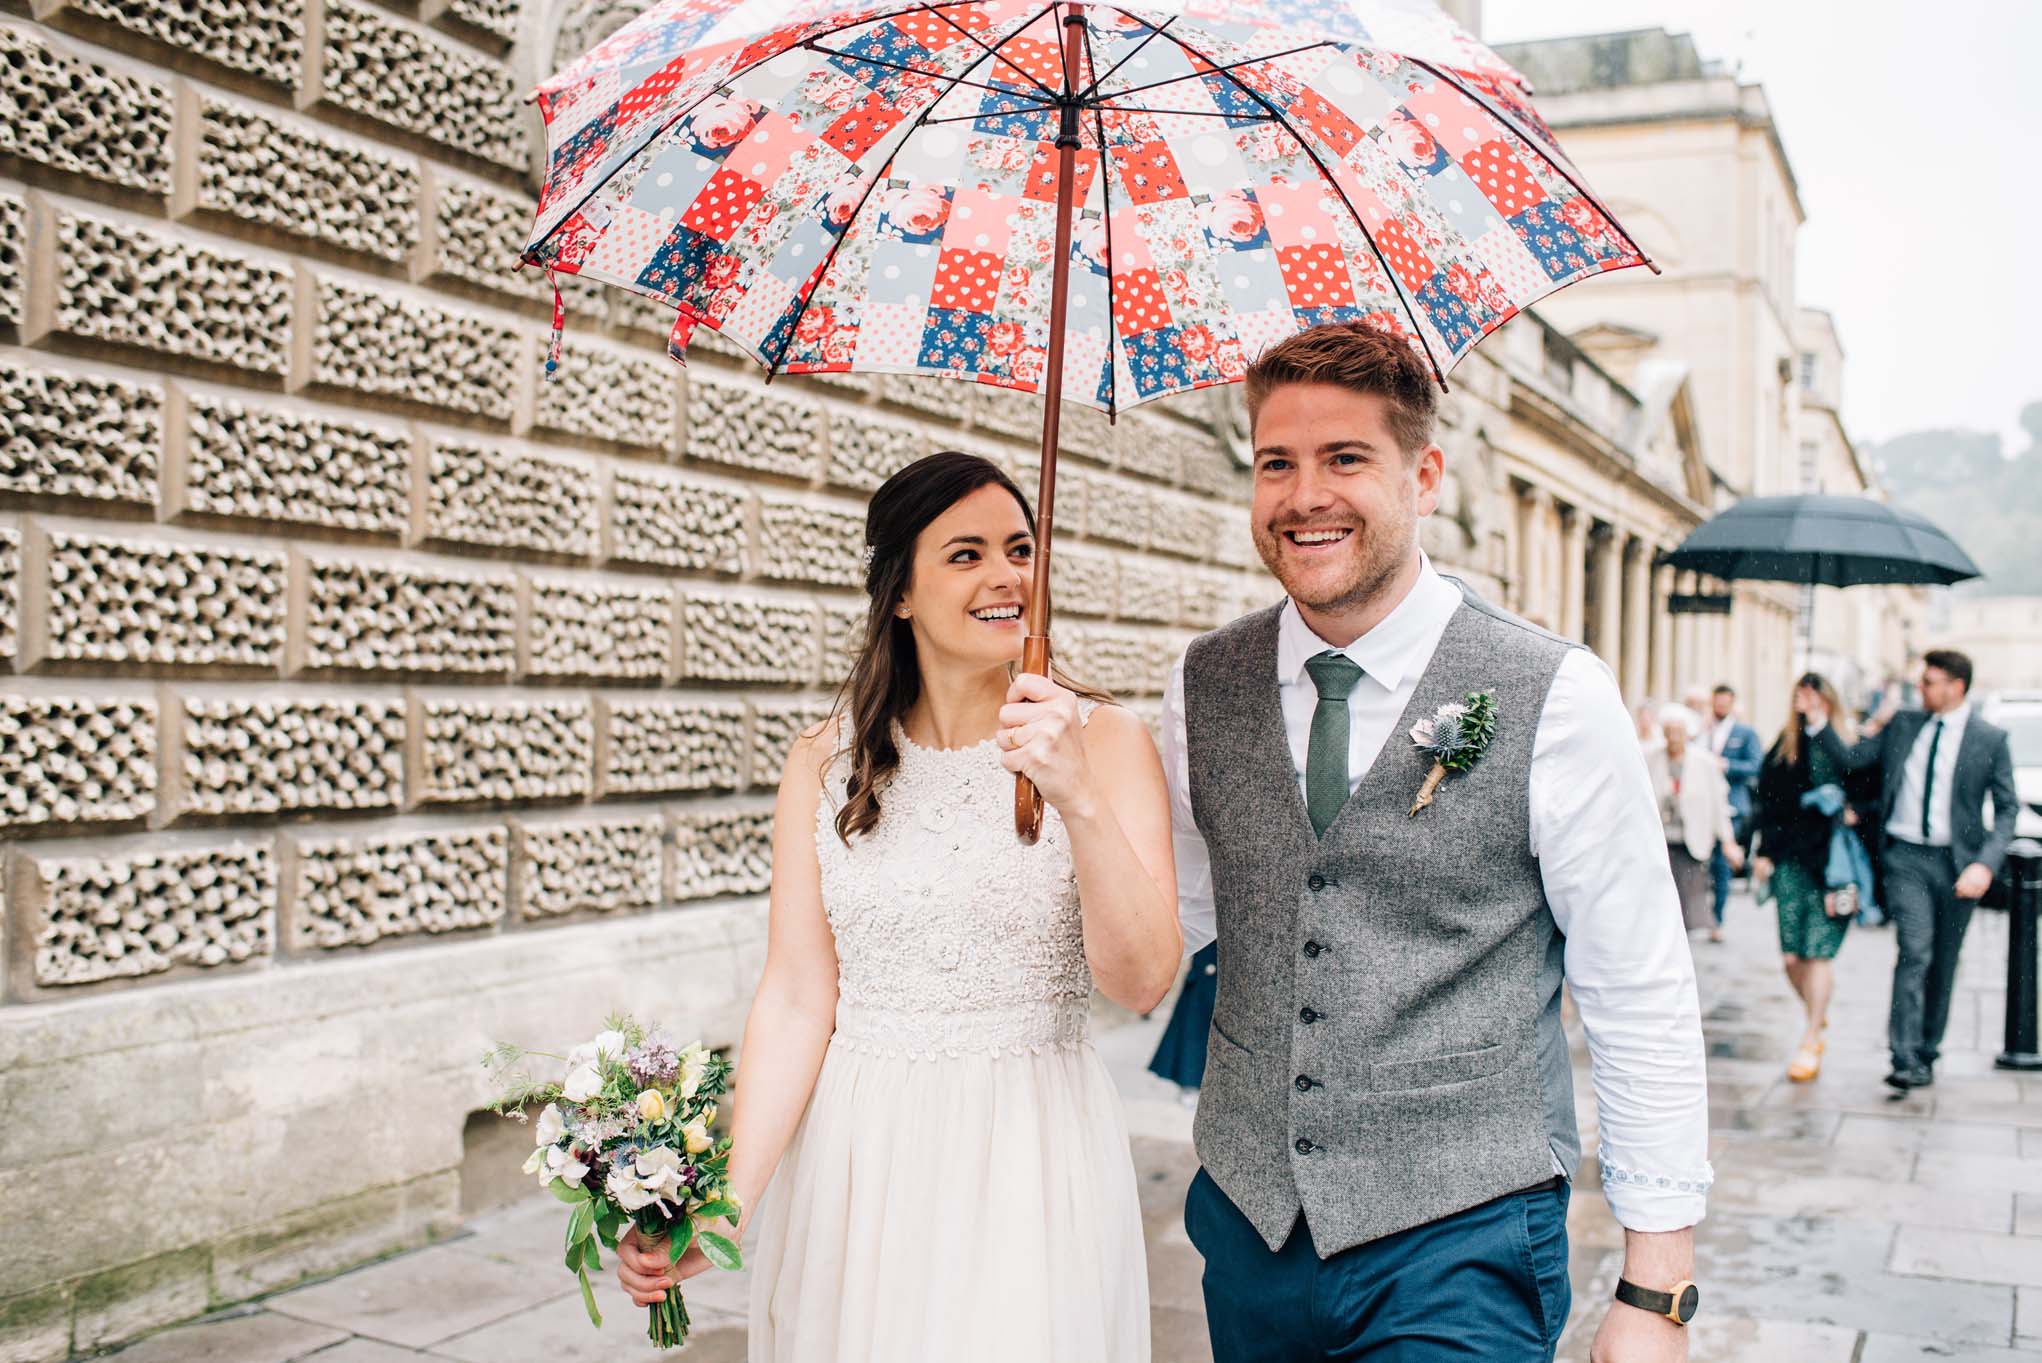 Wedding couple in Stall Street with an umbrella